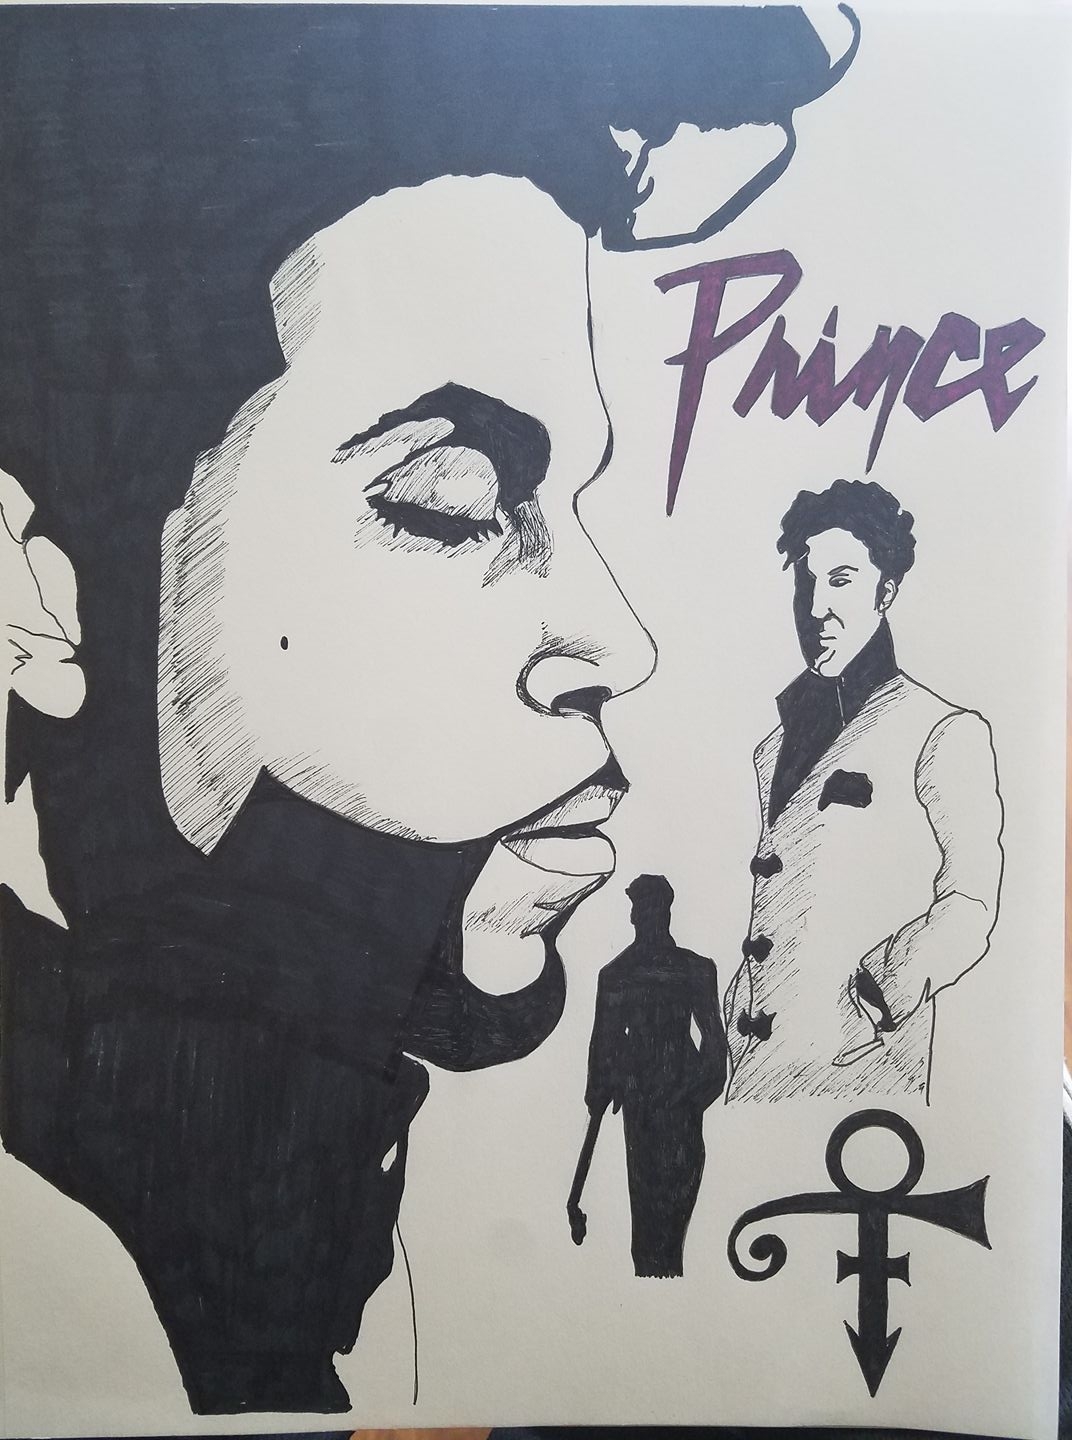  Julius Grey want your opinion on His Prince ART